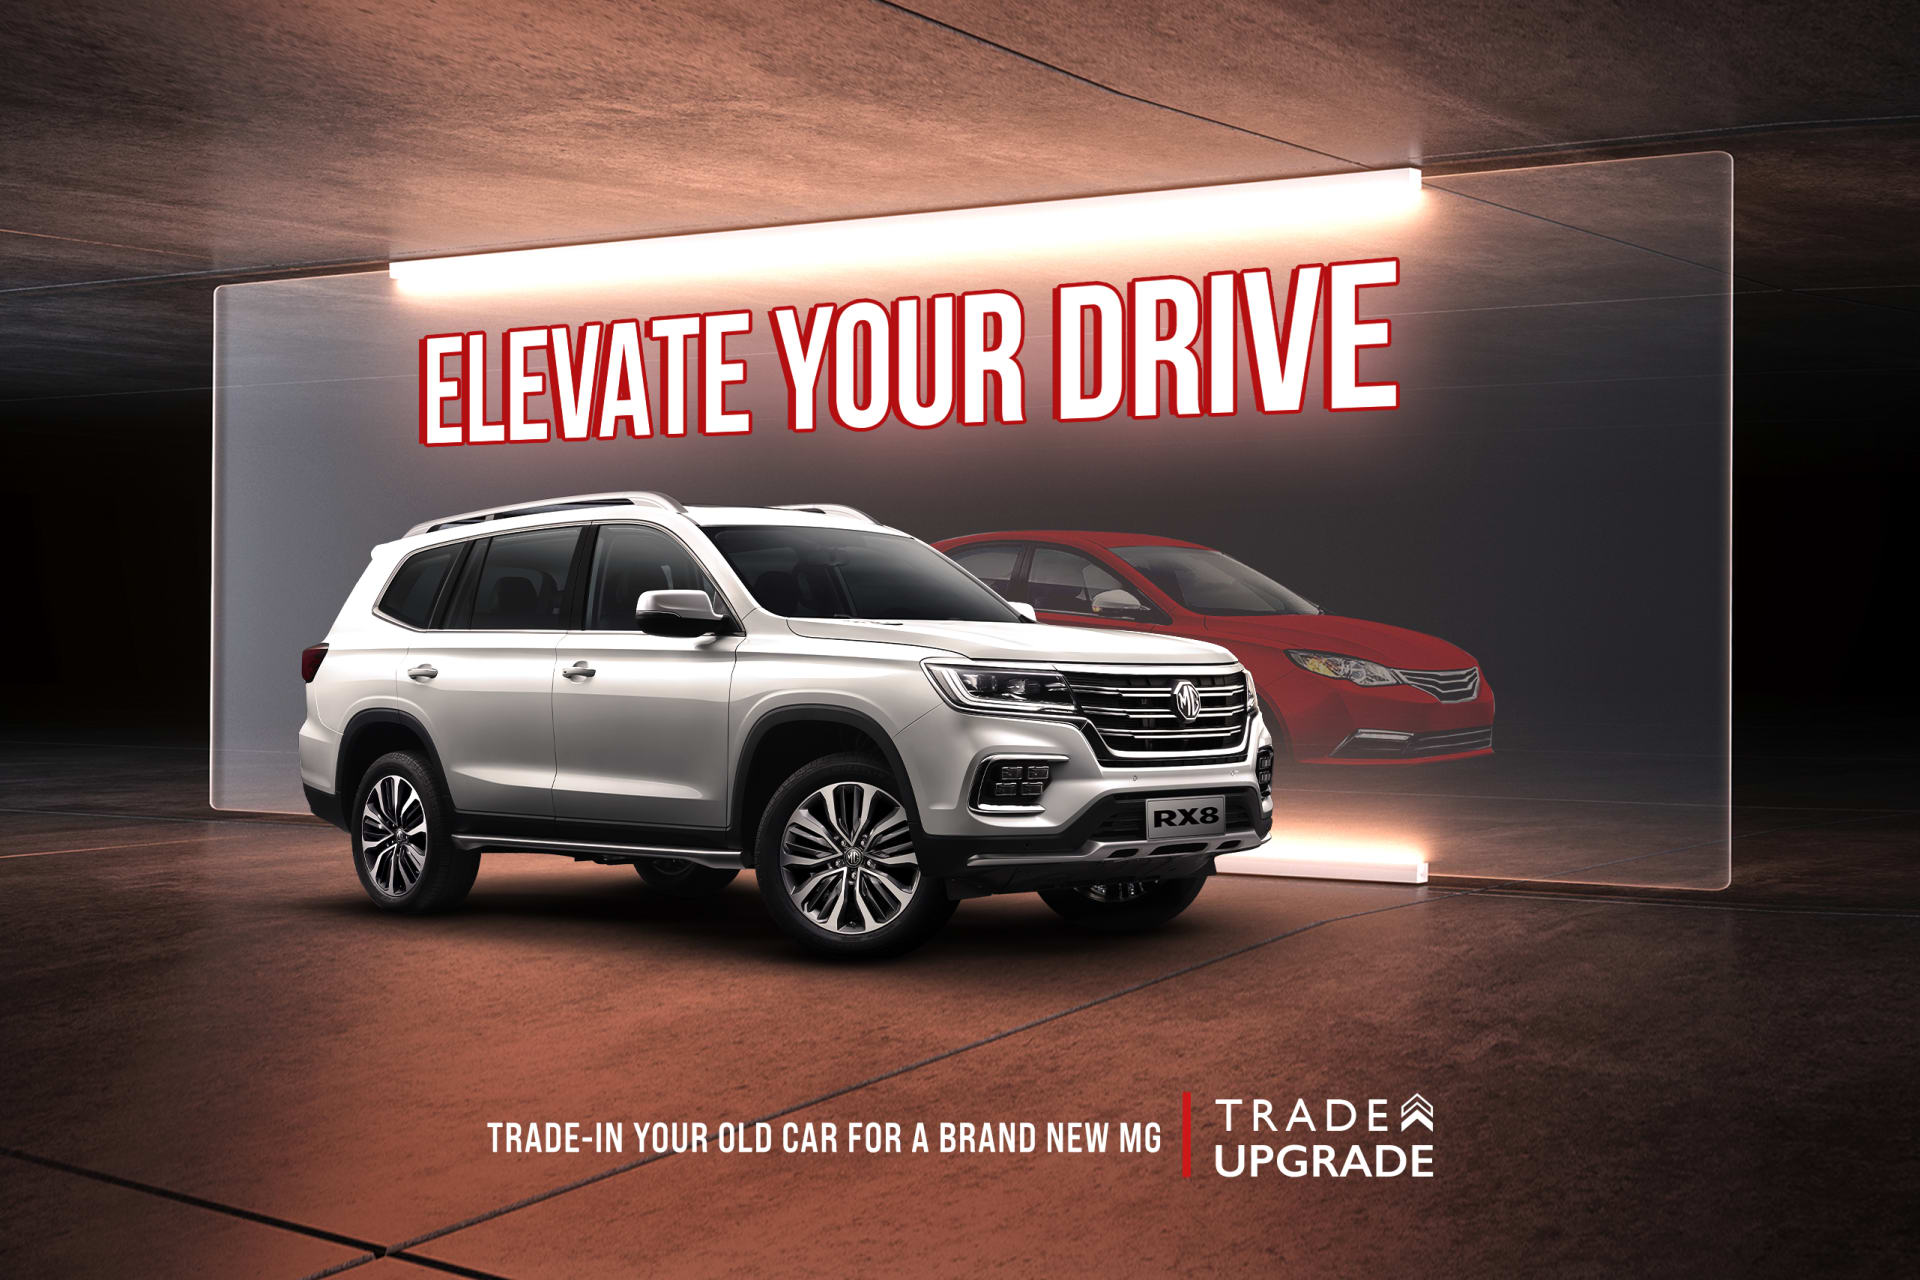 Elevate your drive